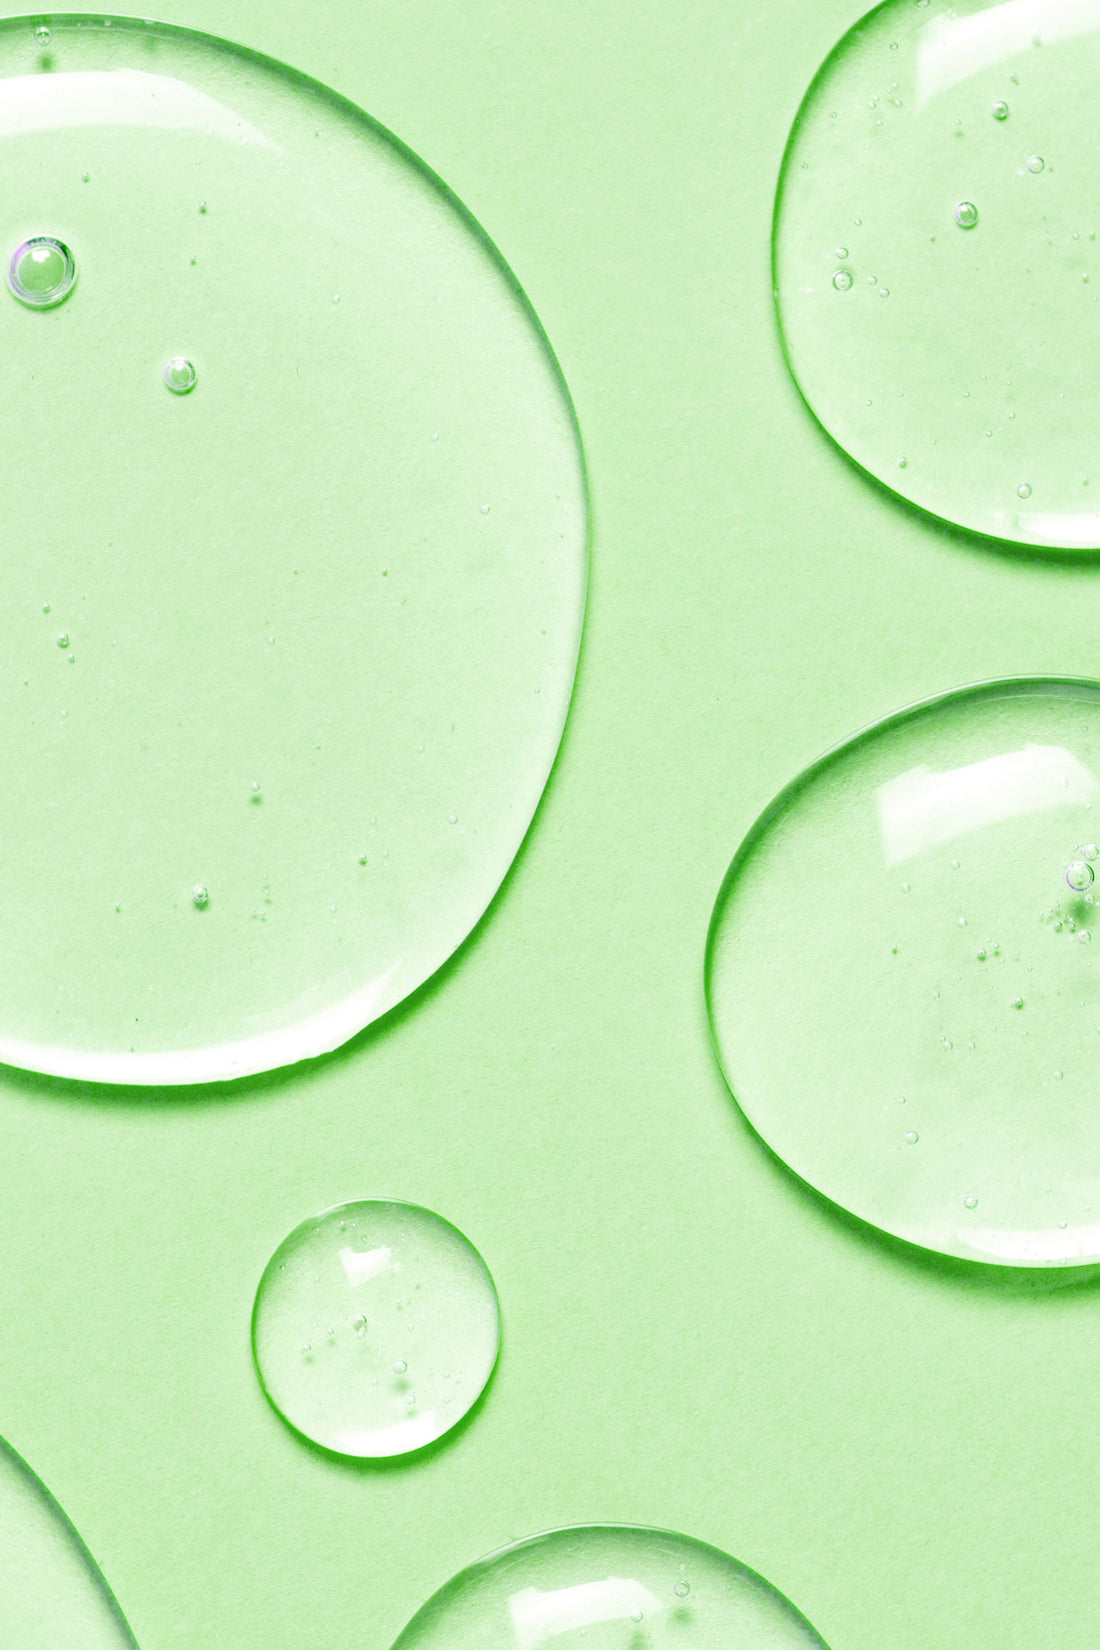 Fresh water drops on light green background